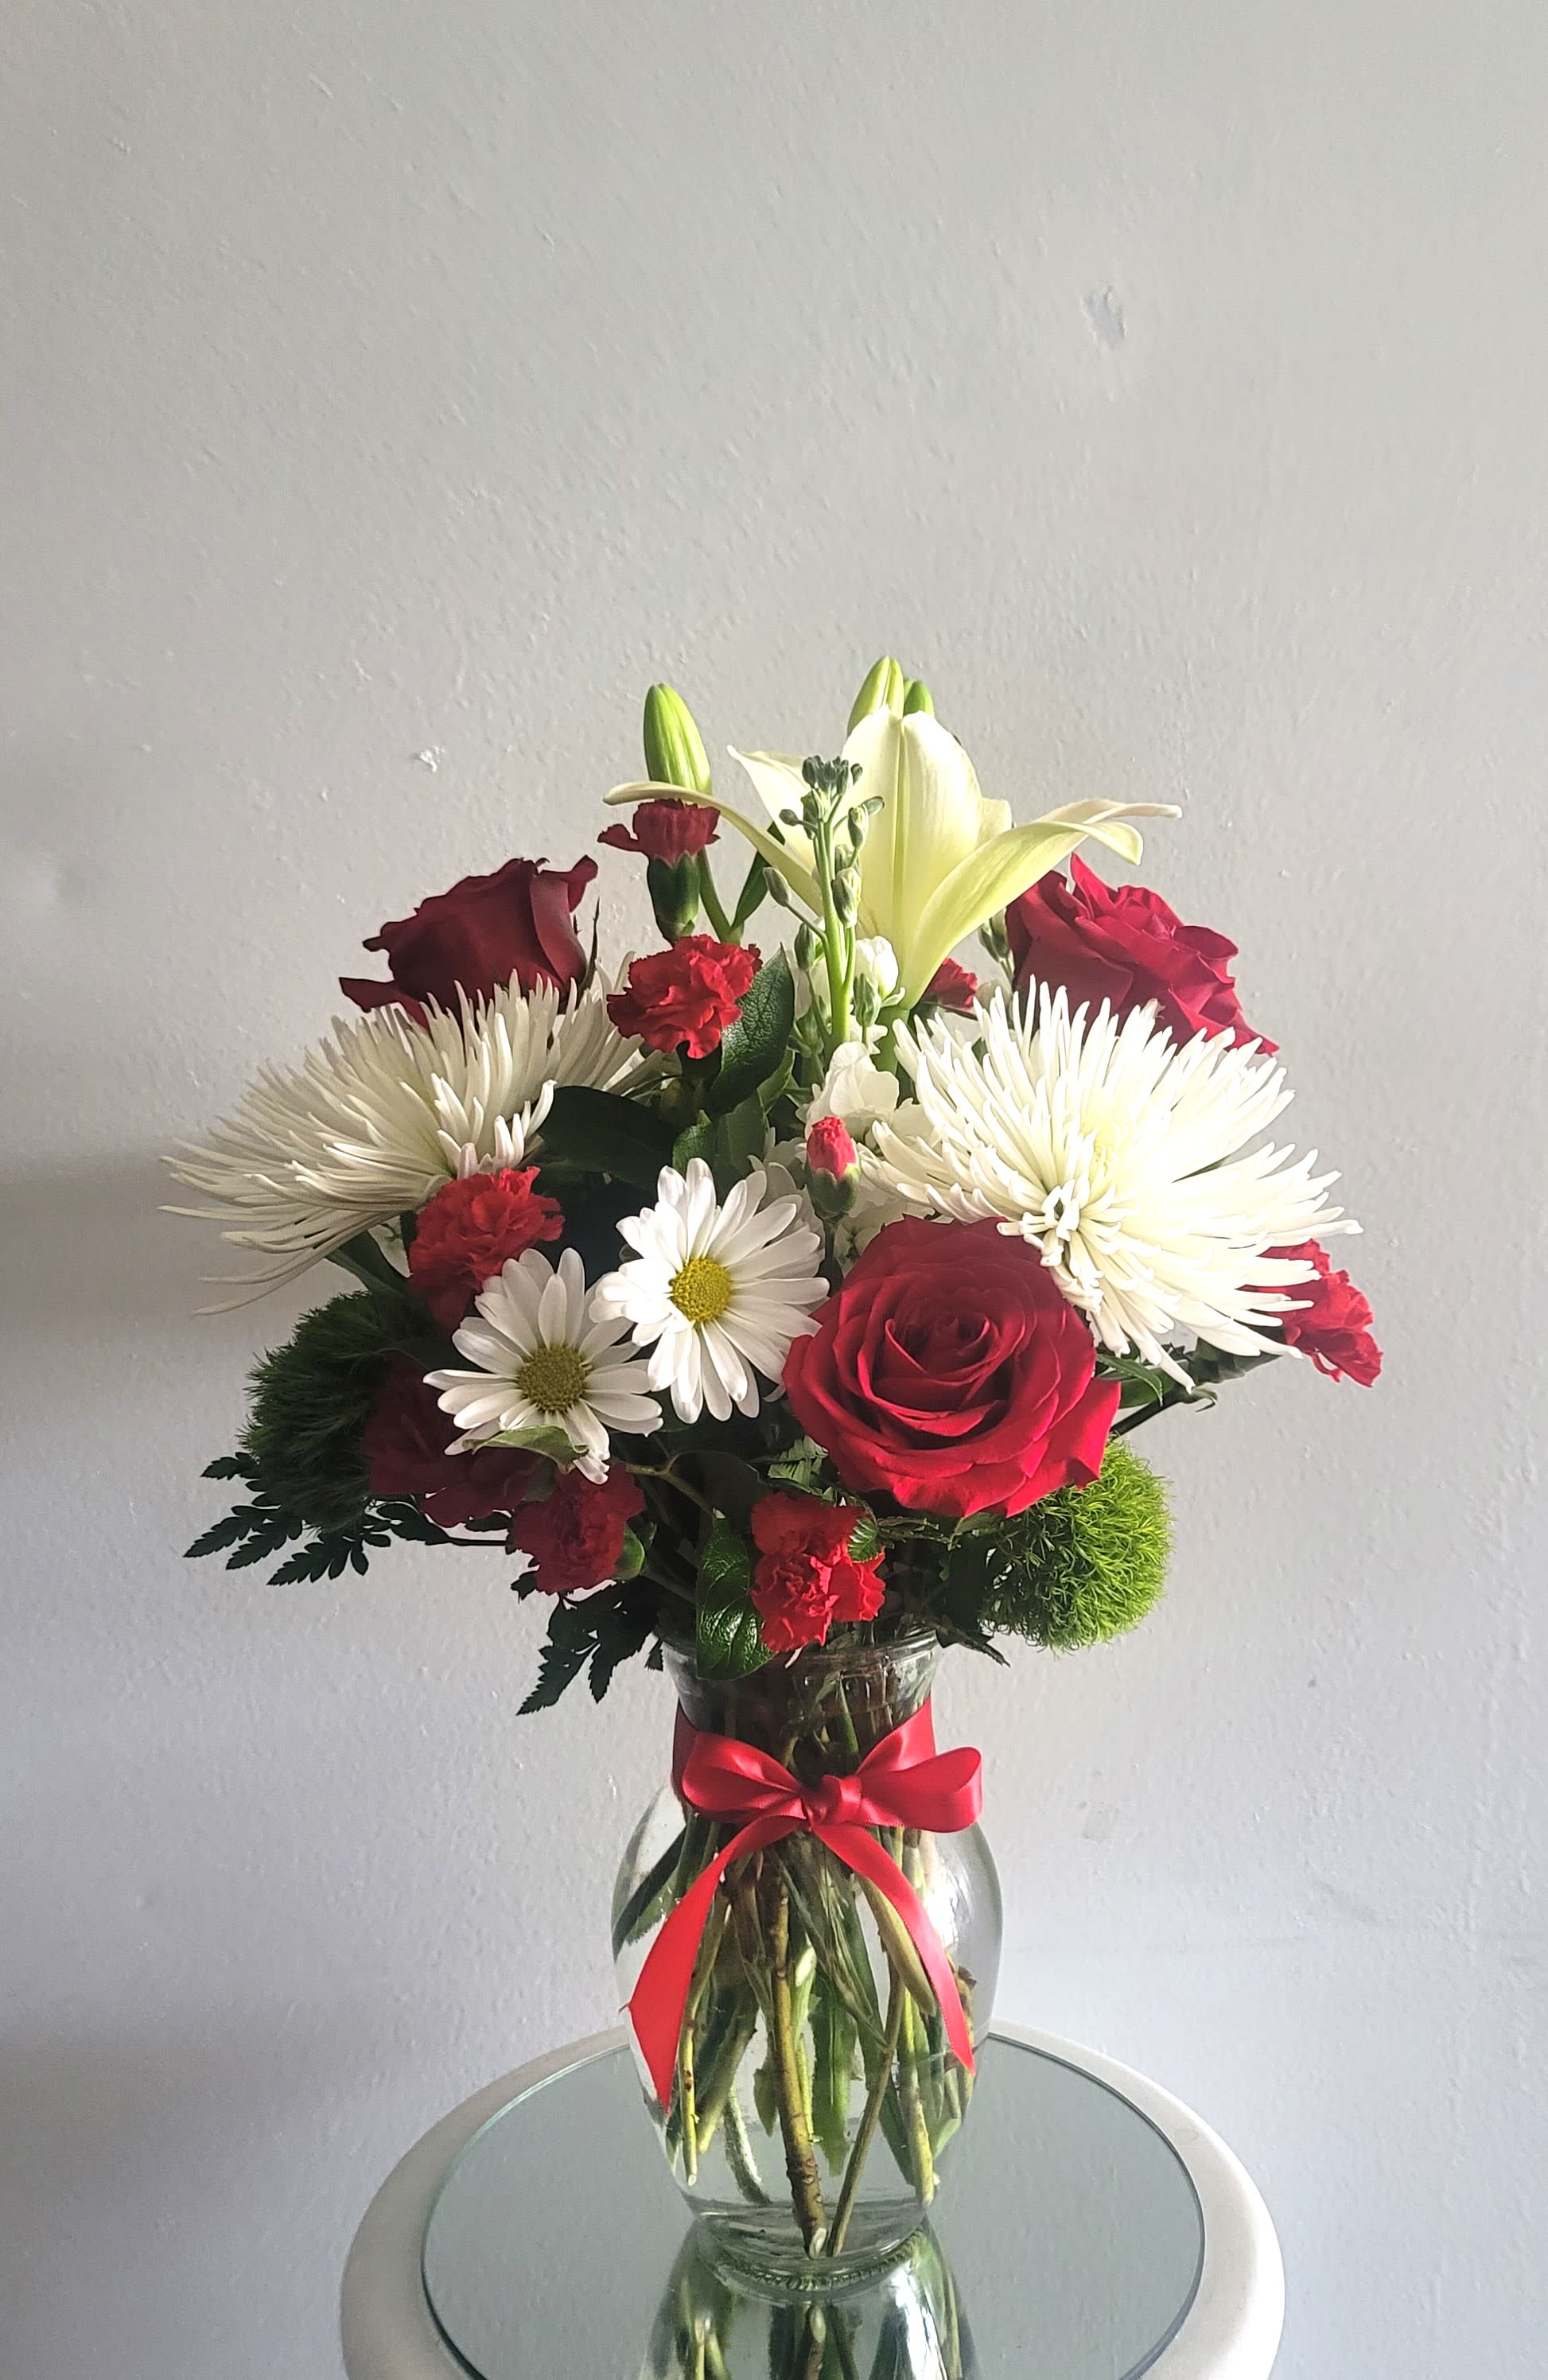  VASE ARRANGEMENT FOR ANY OCCASION - RED AND WHITE MIXED FLOWERS TO SAY I LOVE YOU MORE.